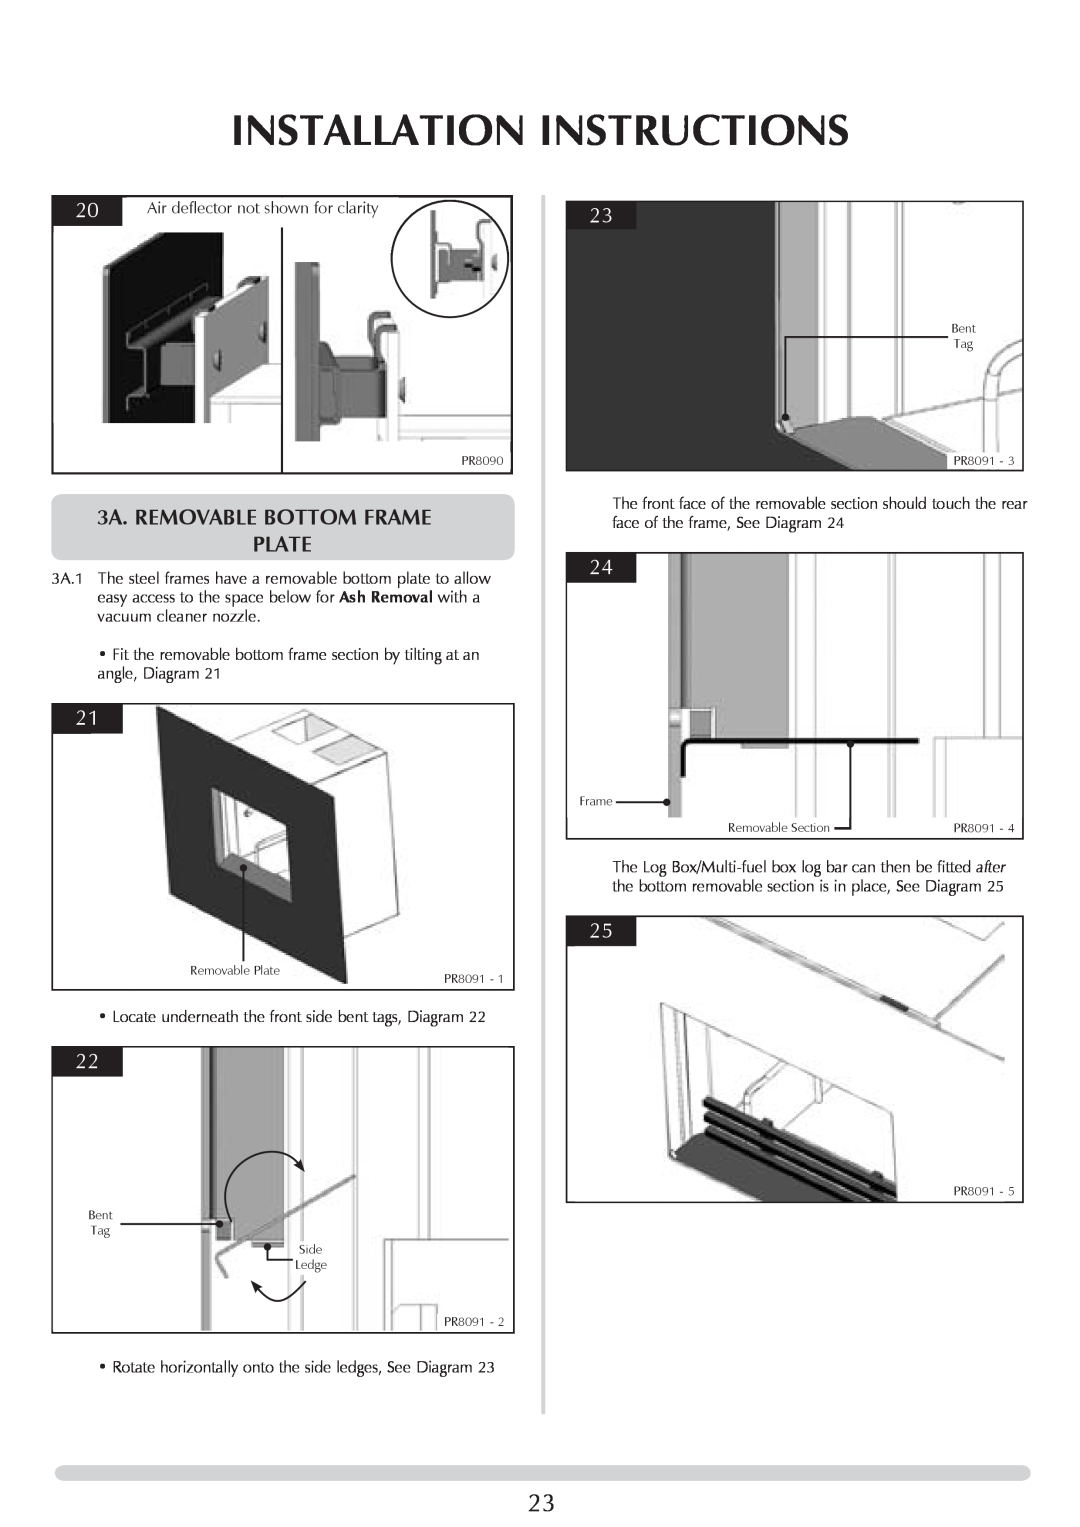 Stovax PM219 manual 3A. Removable bottom Frame plate, Installation Instructions 